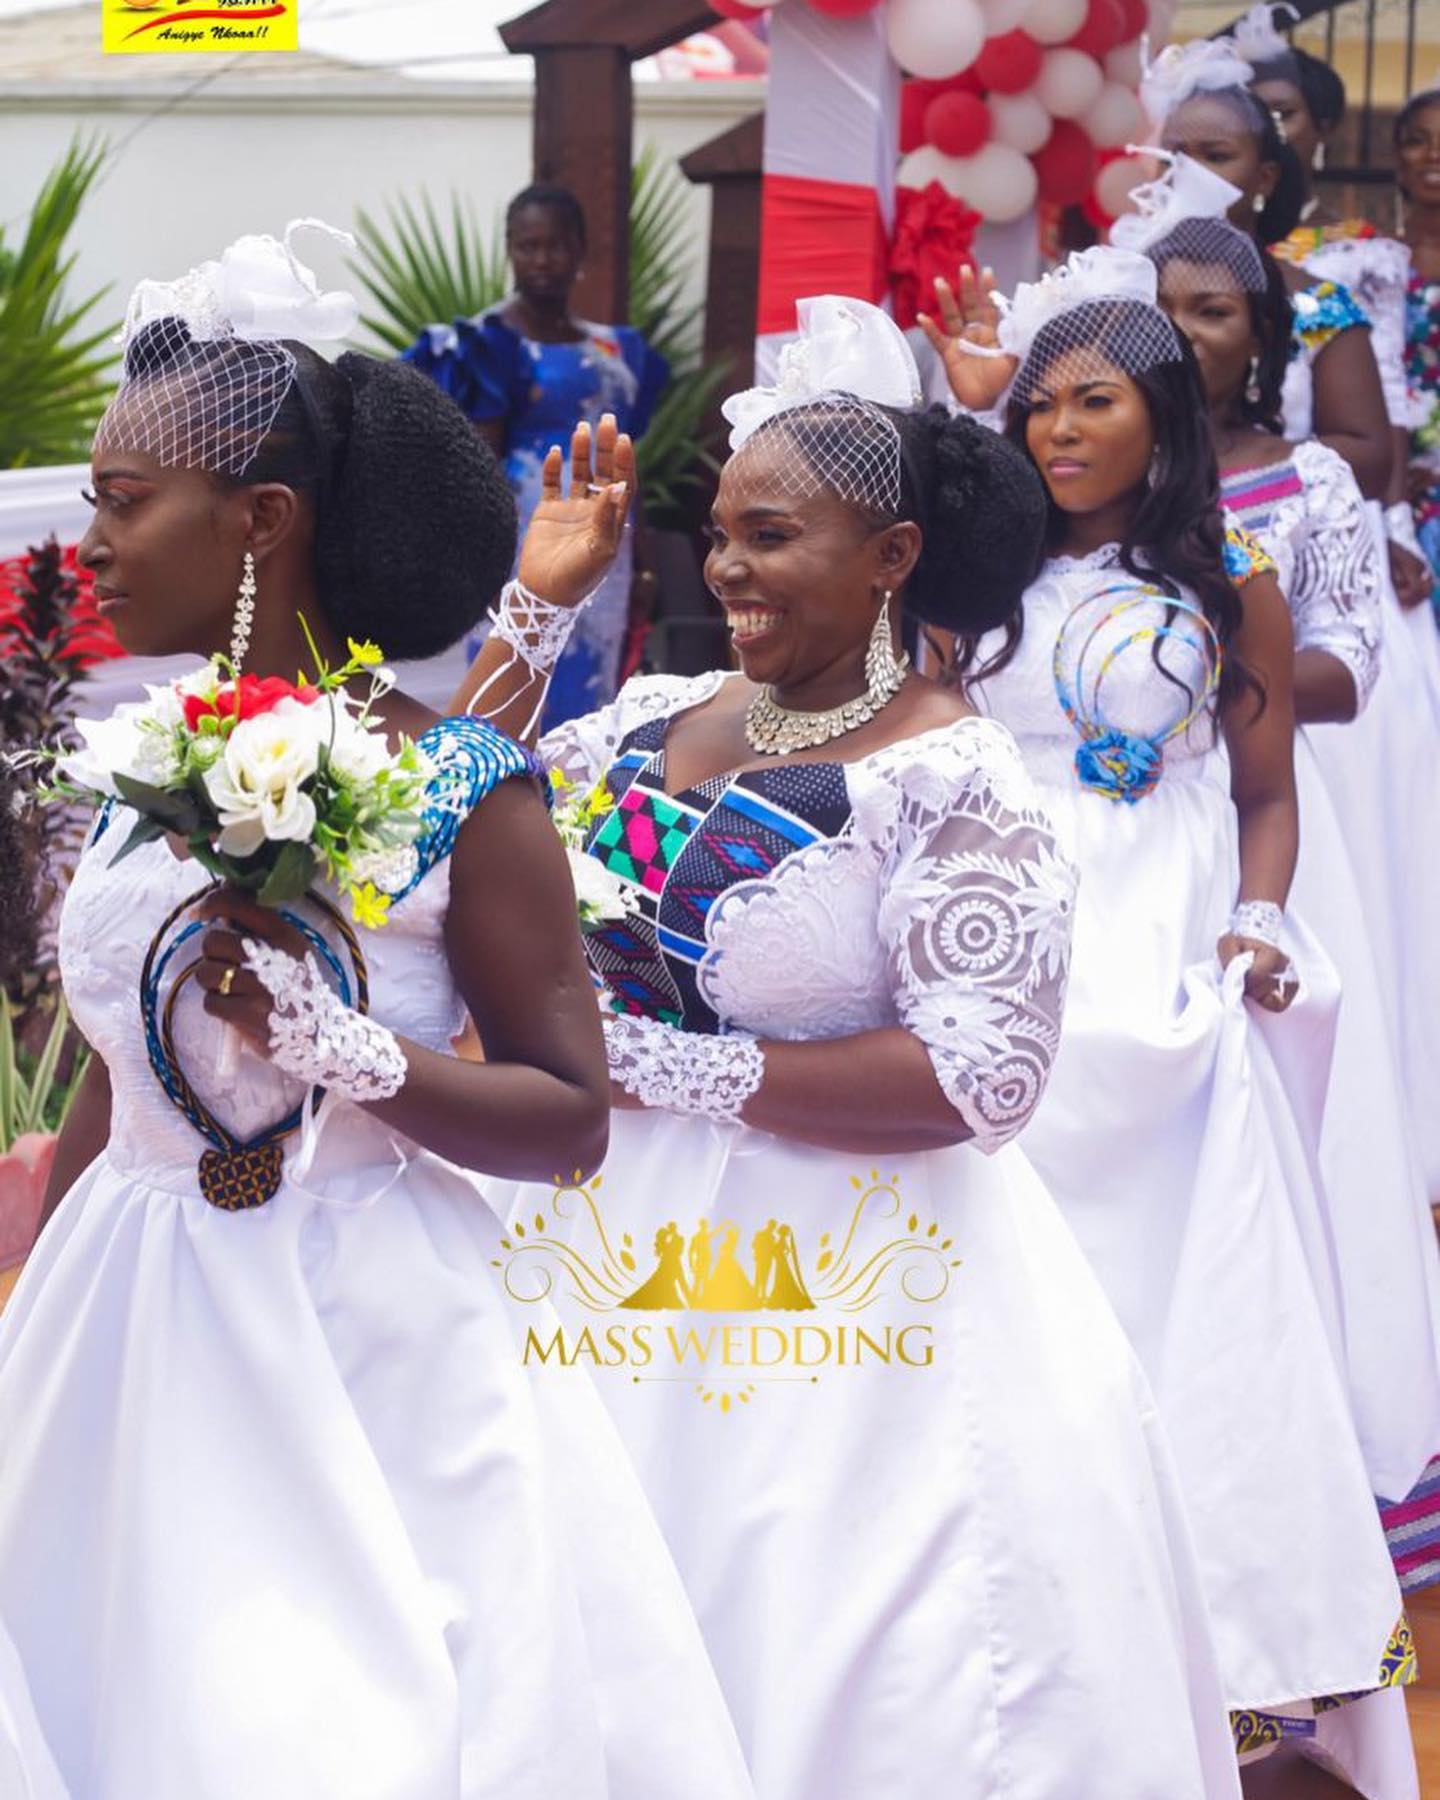 Happy FM goes bliss and glam with Val’s Day Mass Wedding